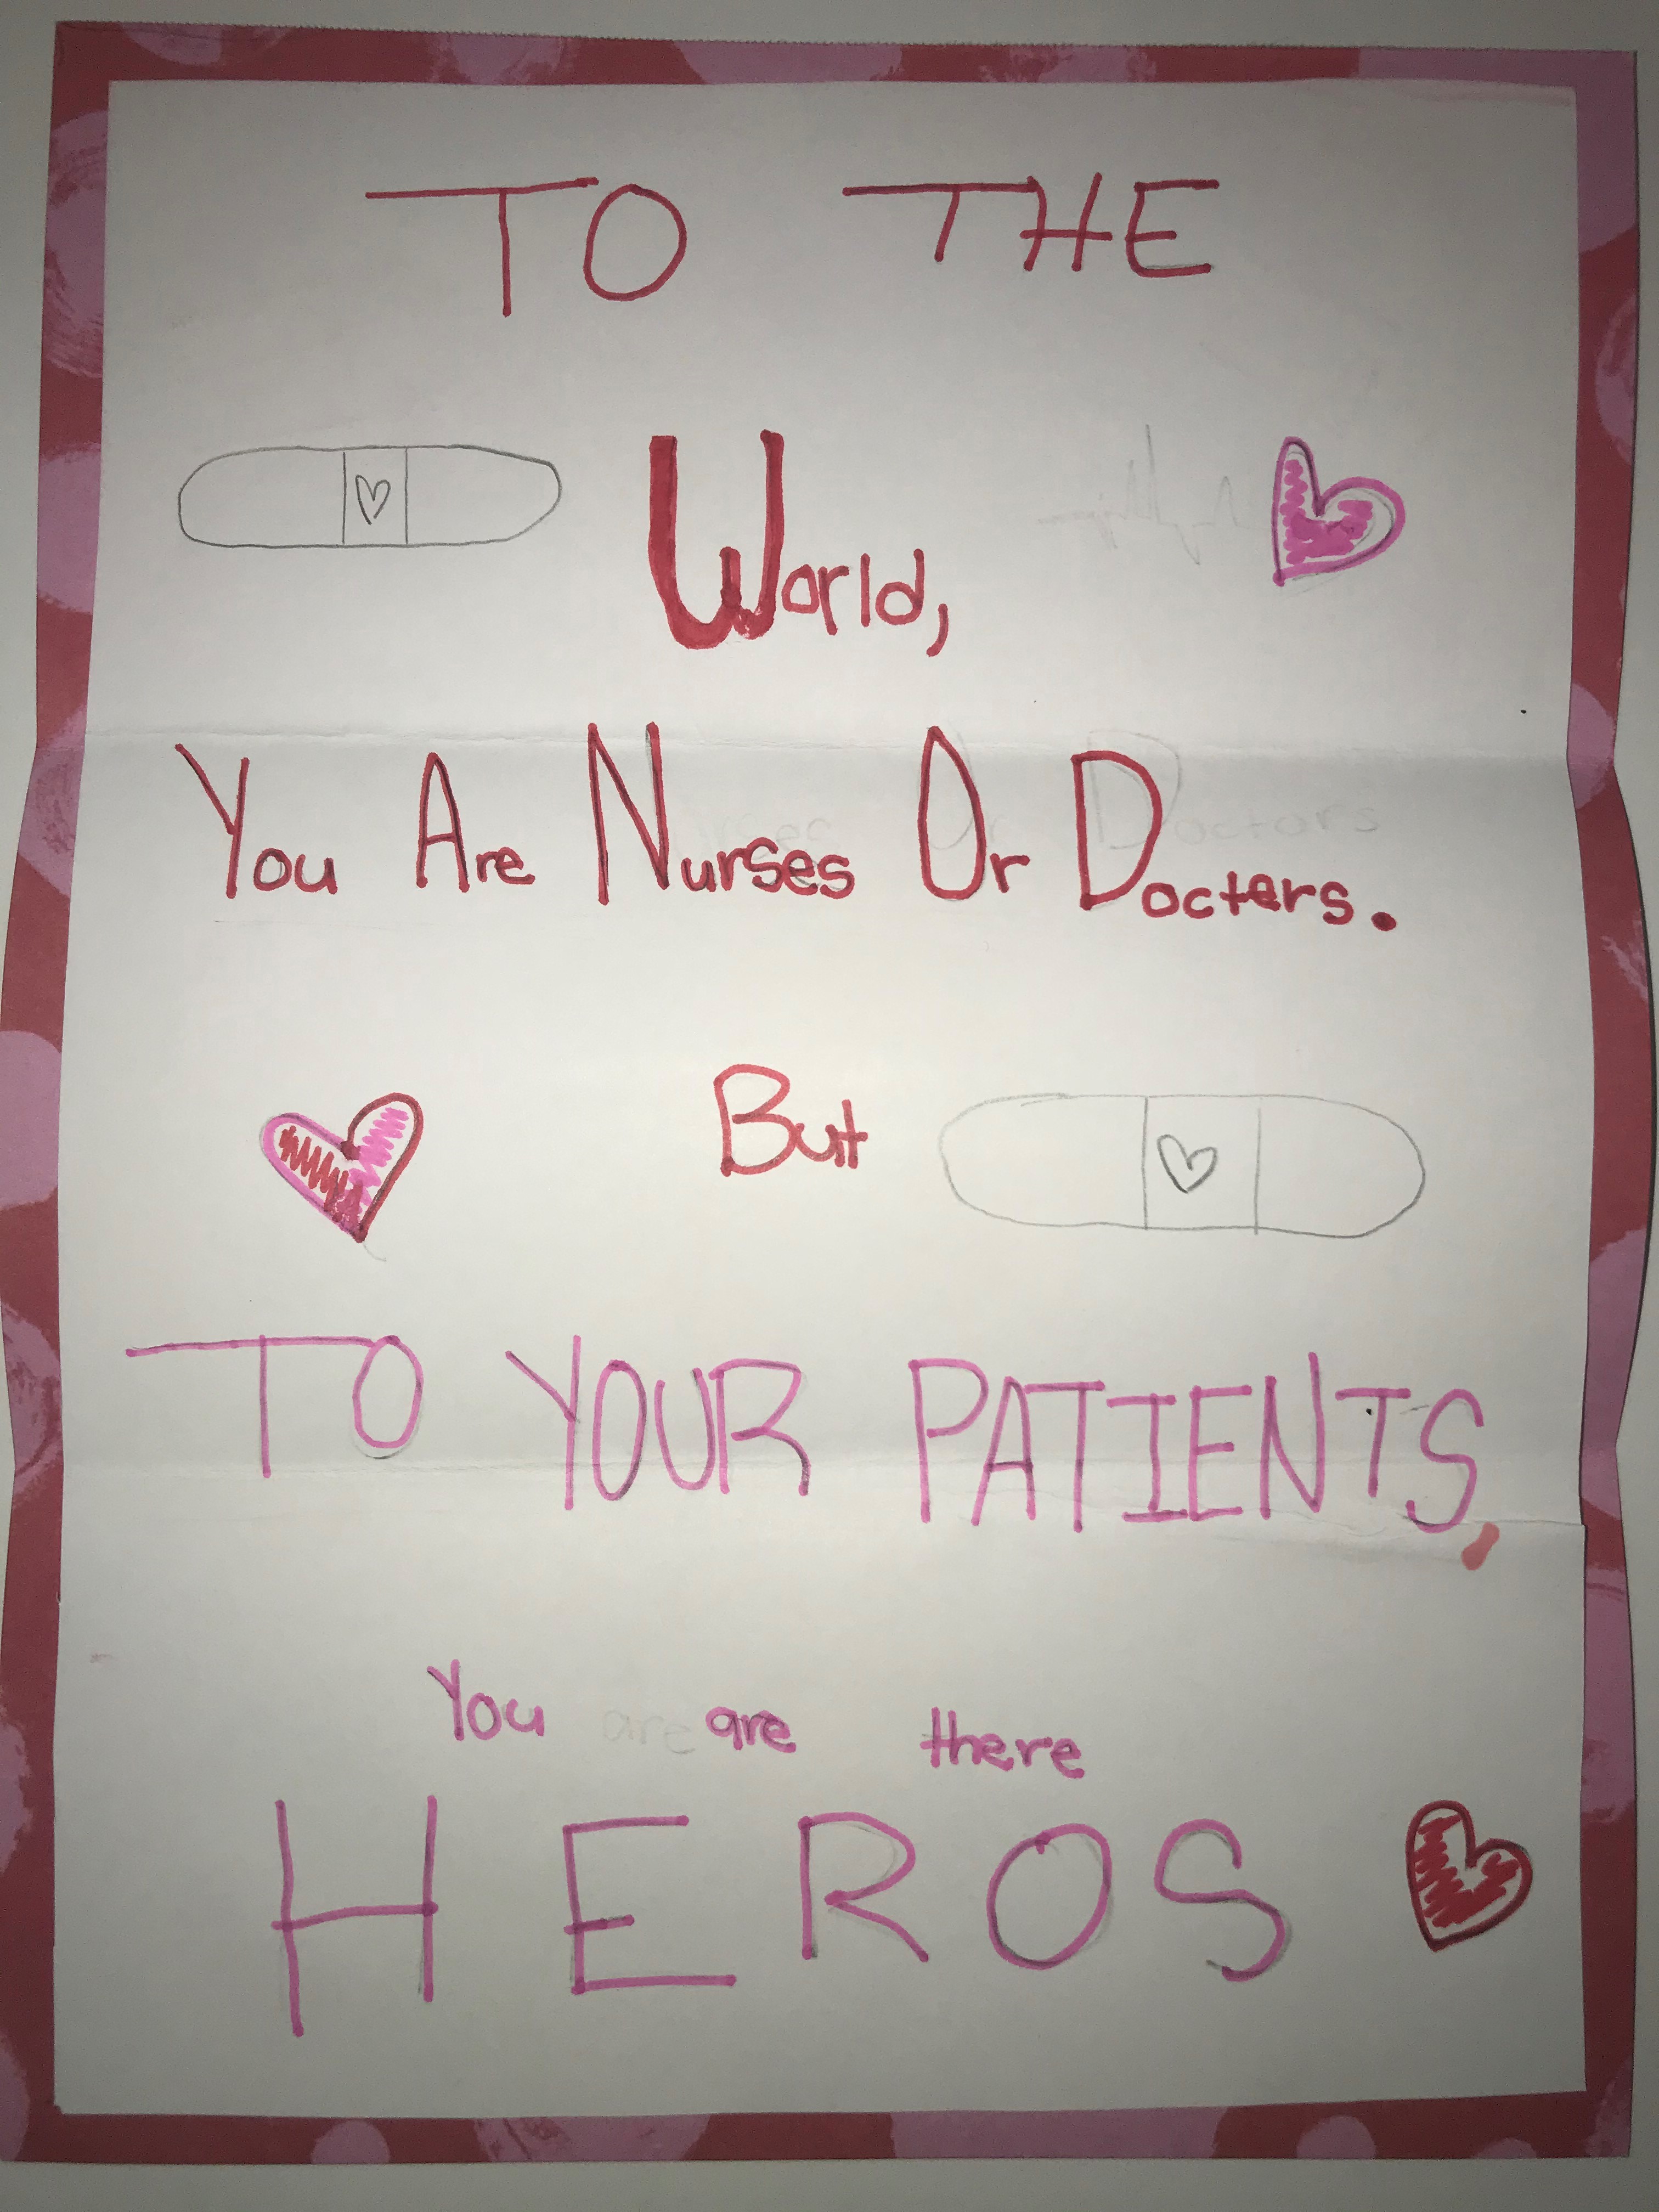 To the world, you are nurses and doctors. But to your patients, you are their heroes.